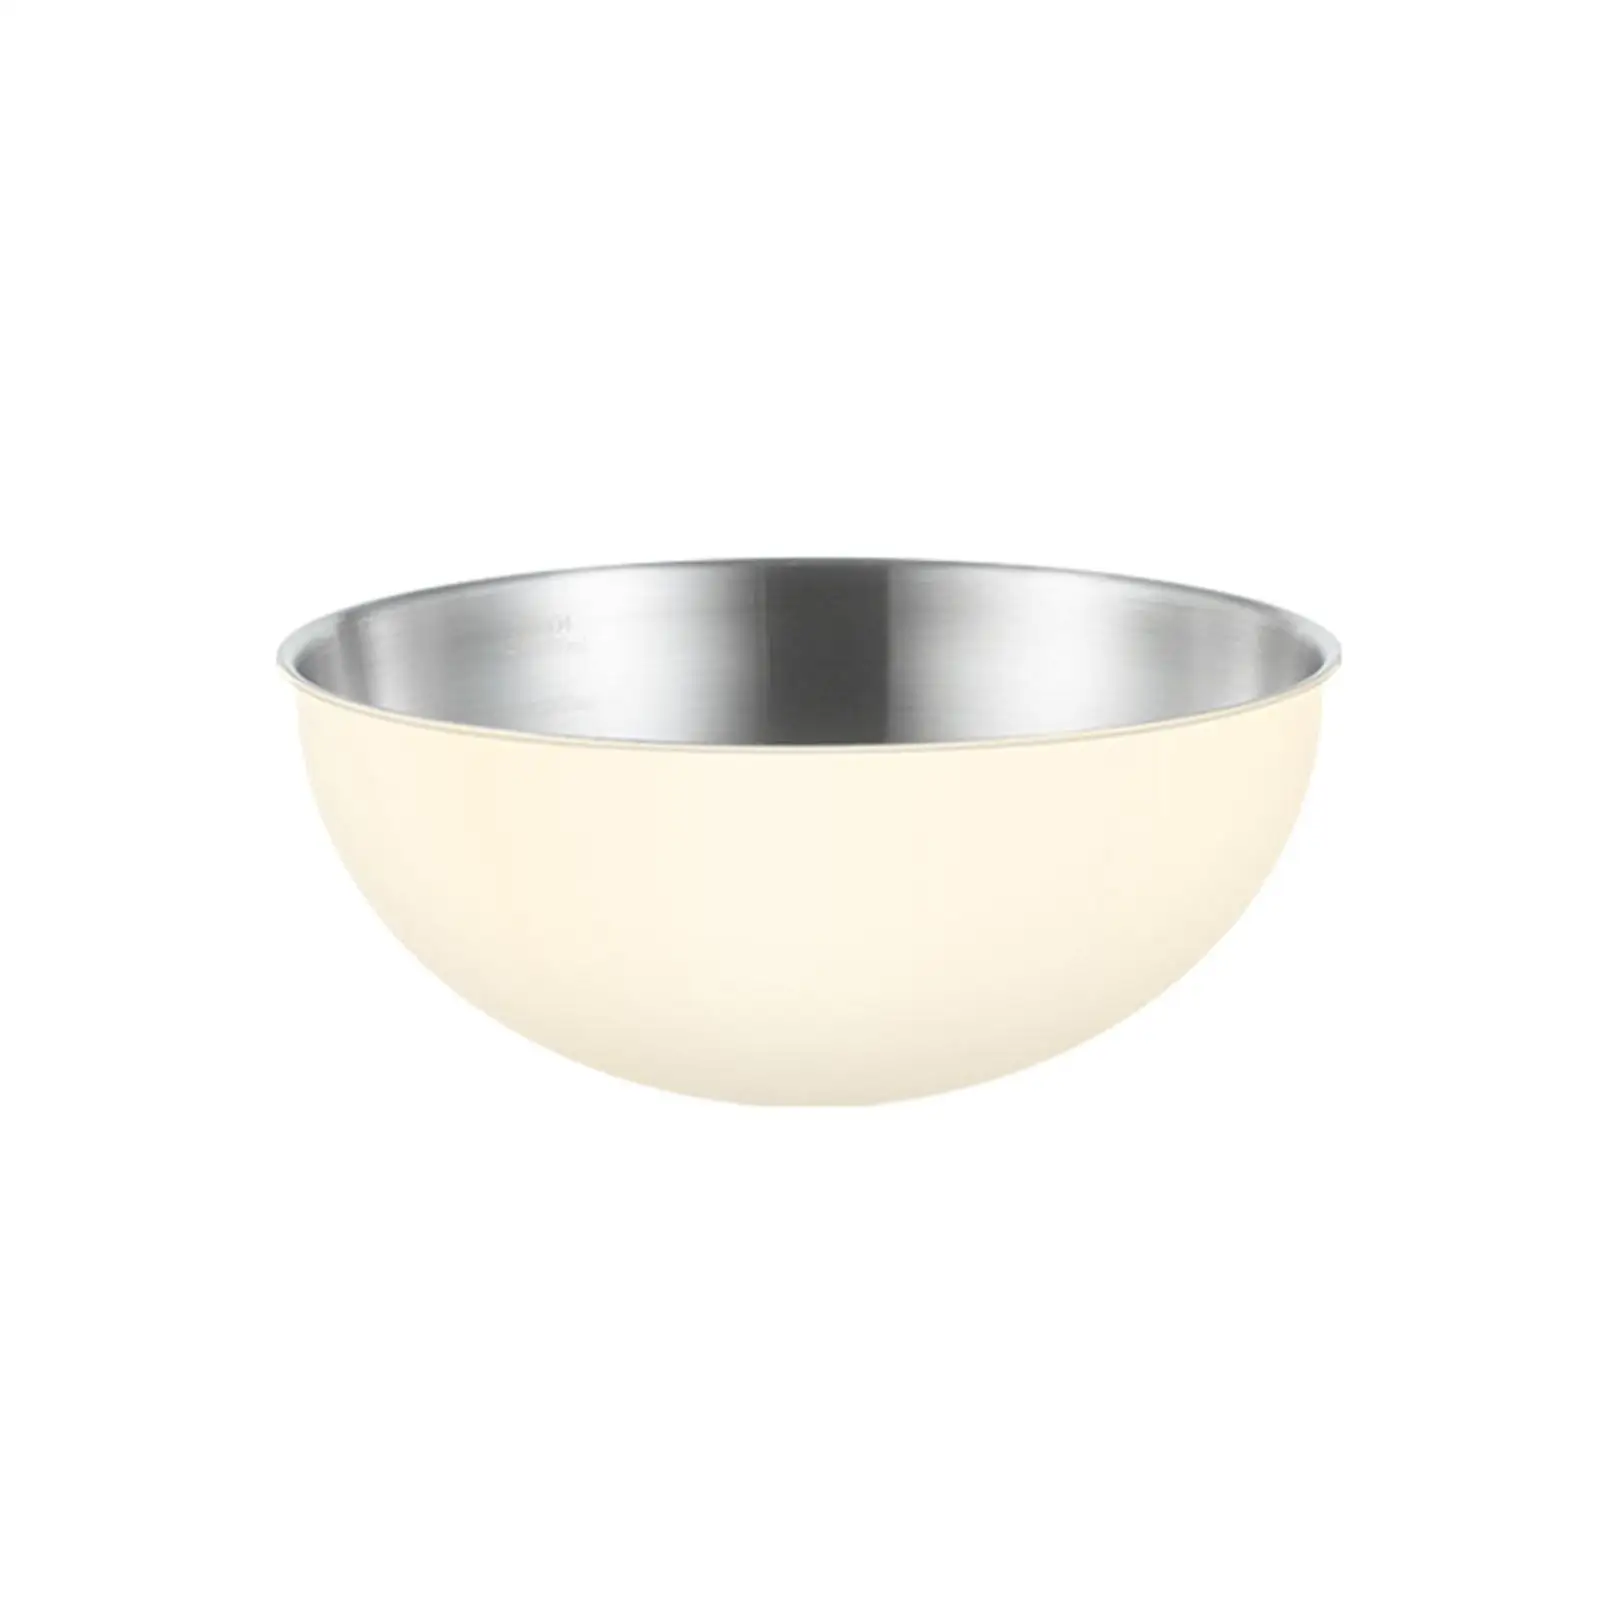 Serving Bowls Container Stainless Steel Durable Soup Bowls Salad Bowls for Party Restaurant Dining Table Kitchen